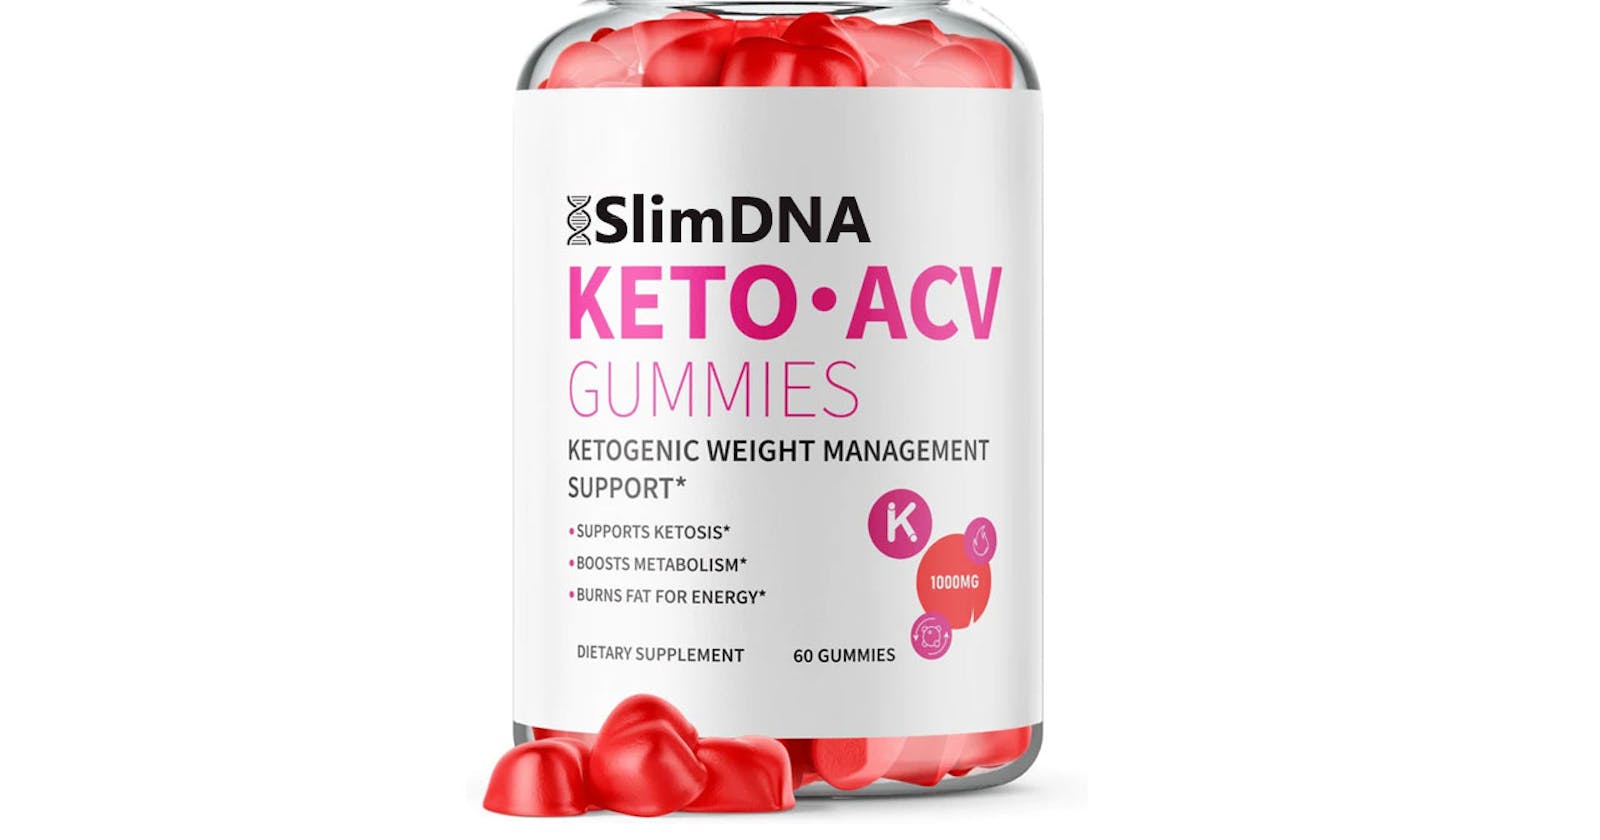 SlimDNA Keto ACV Gummies: Lose Weight Quickly & fat Burn, Worth It or Scam? Read More